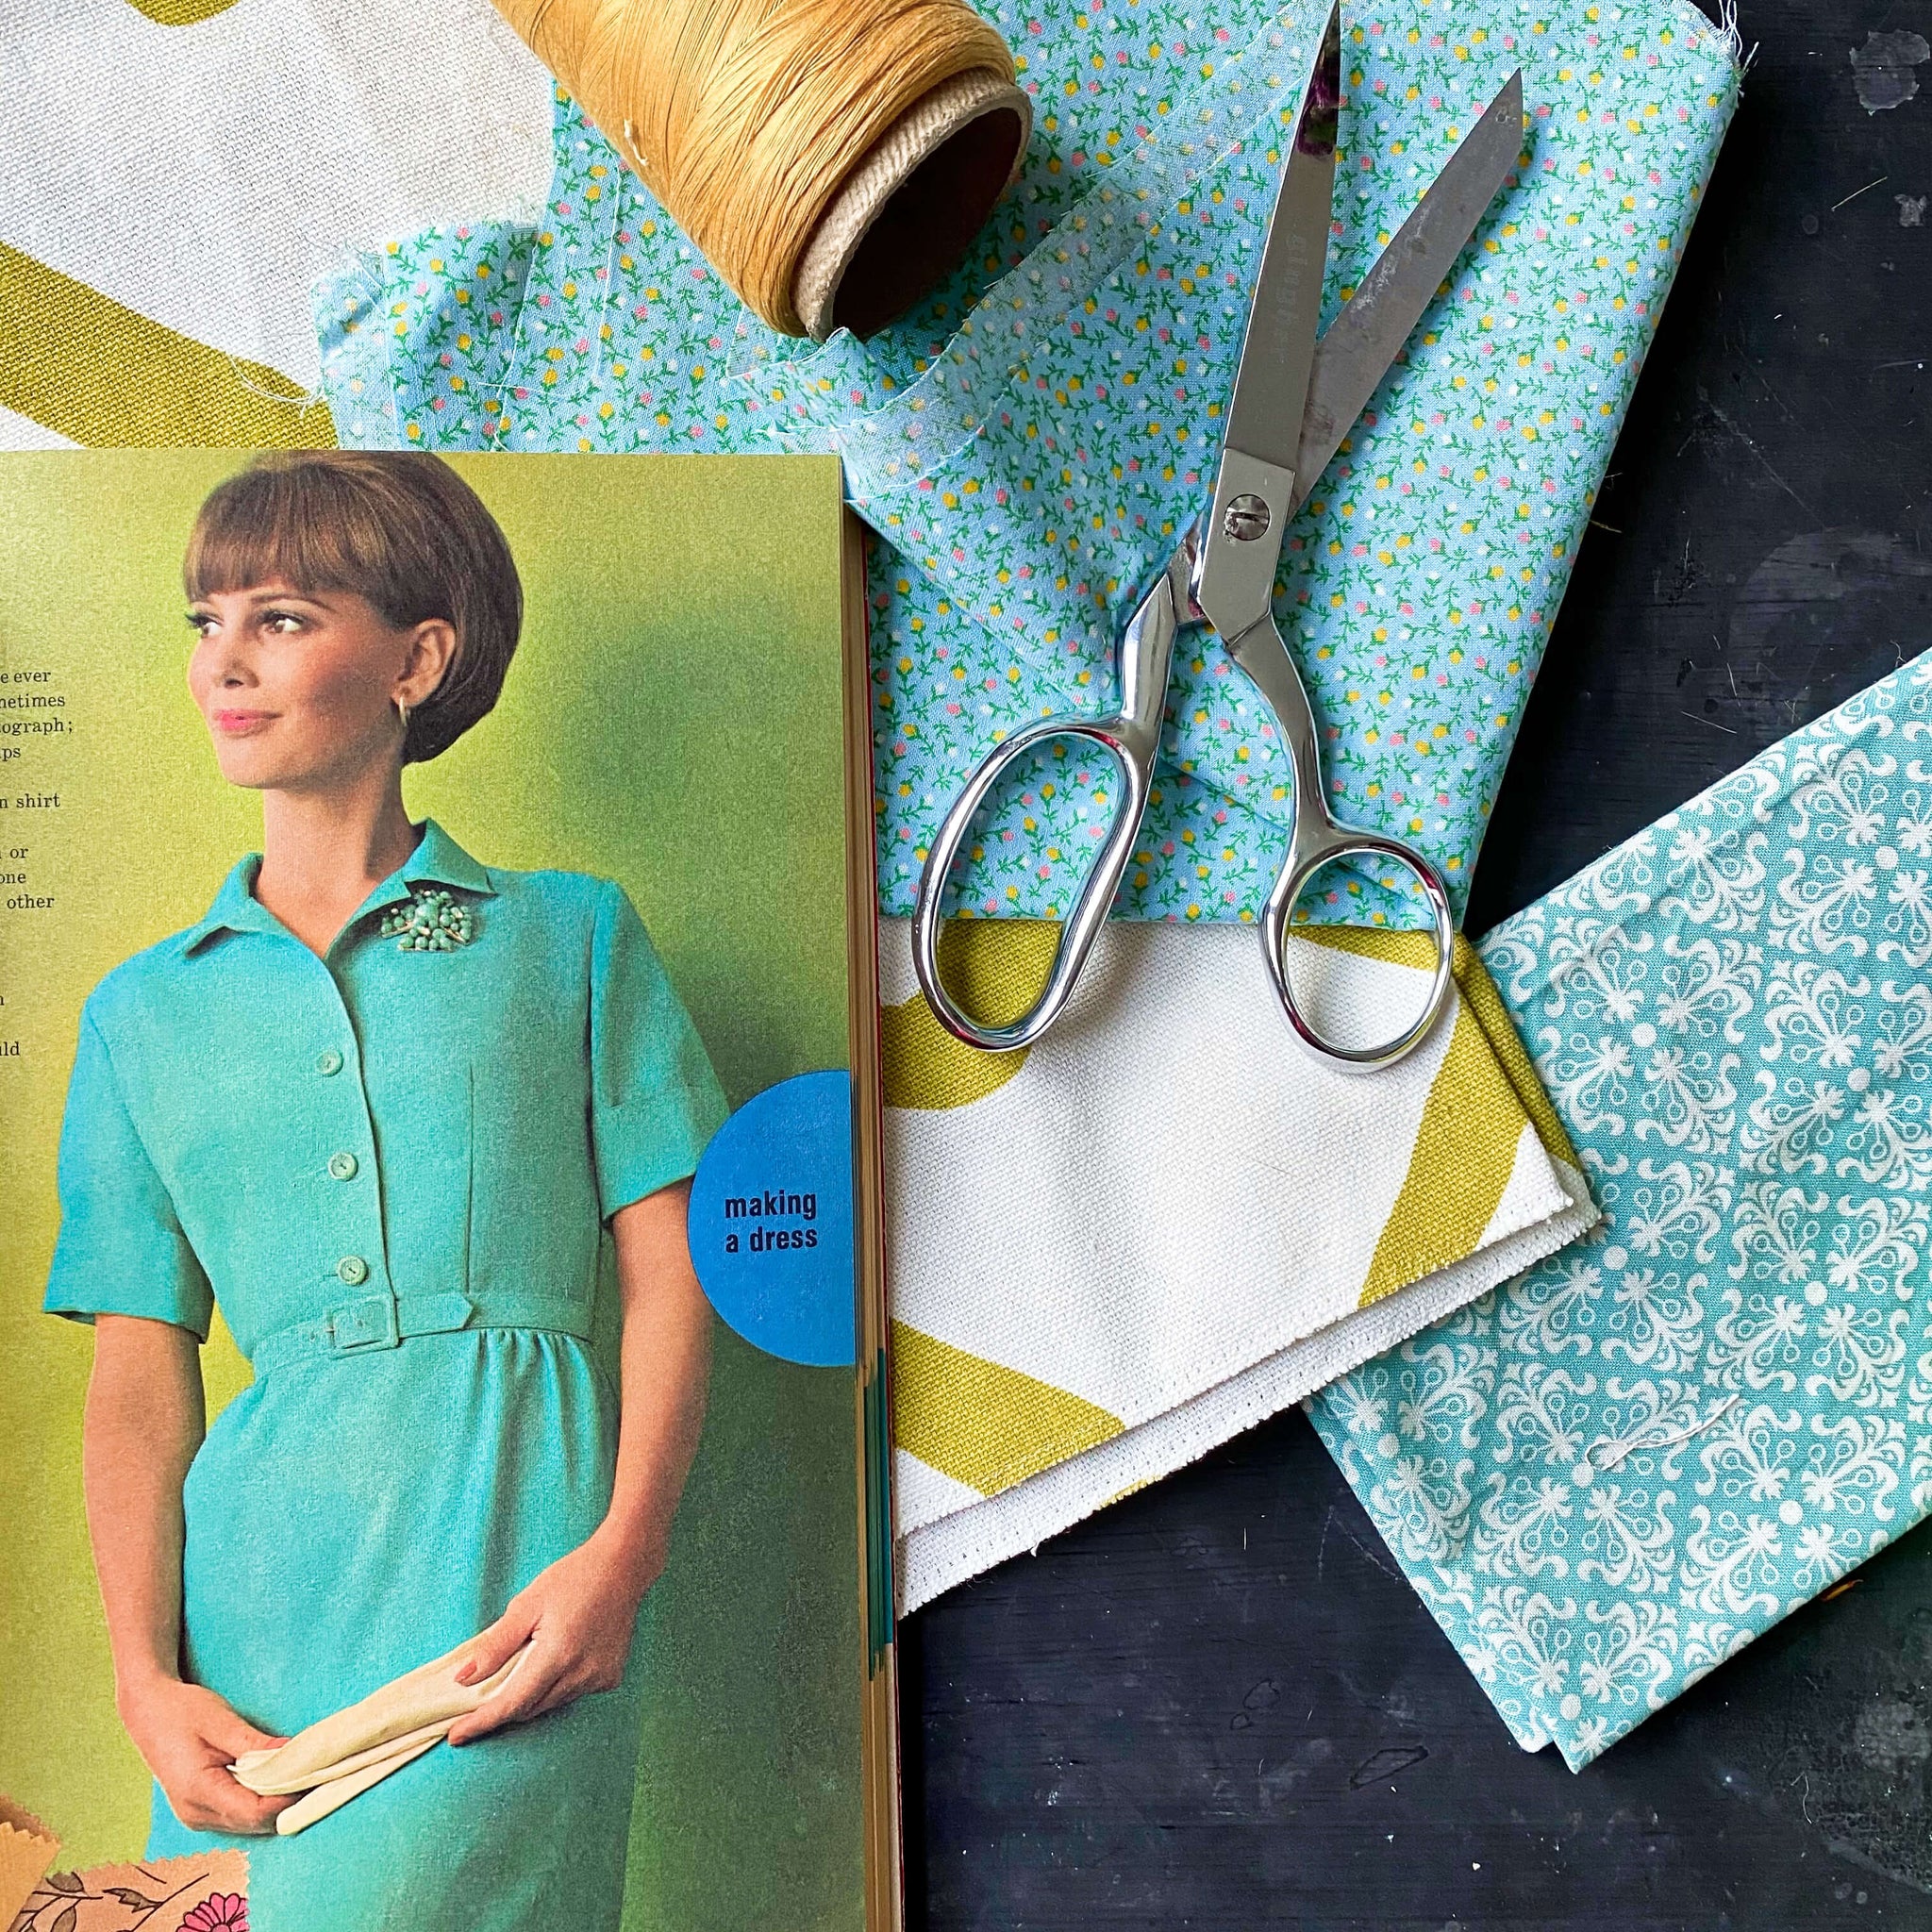 Simplicity Sewing Book - 1965 Edition - Instructional Guidebook for 1960s Fashion Design for Women